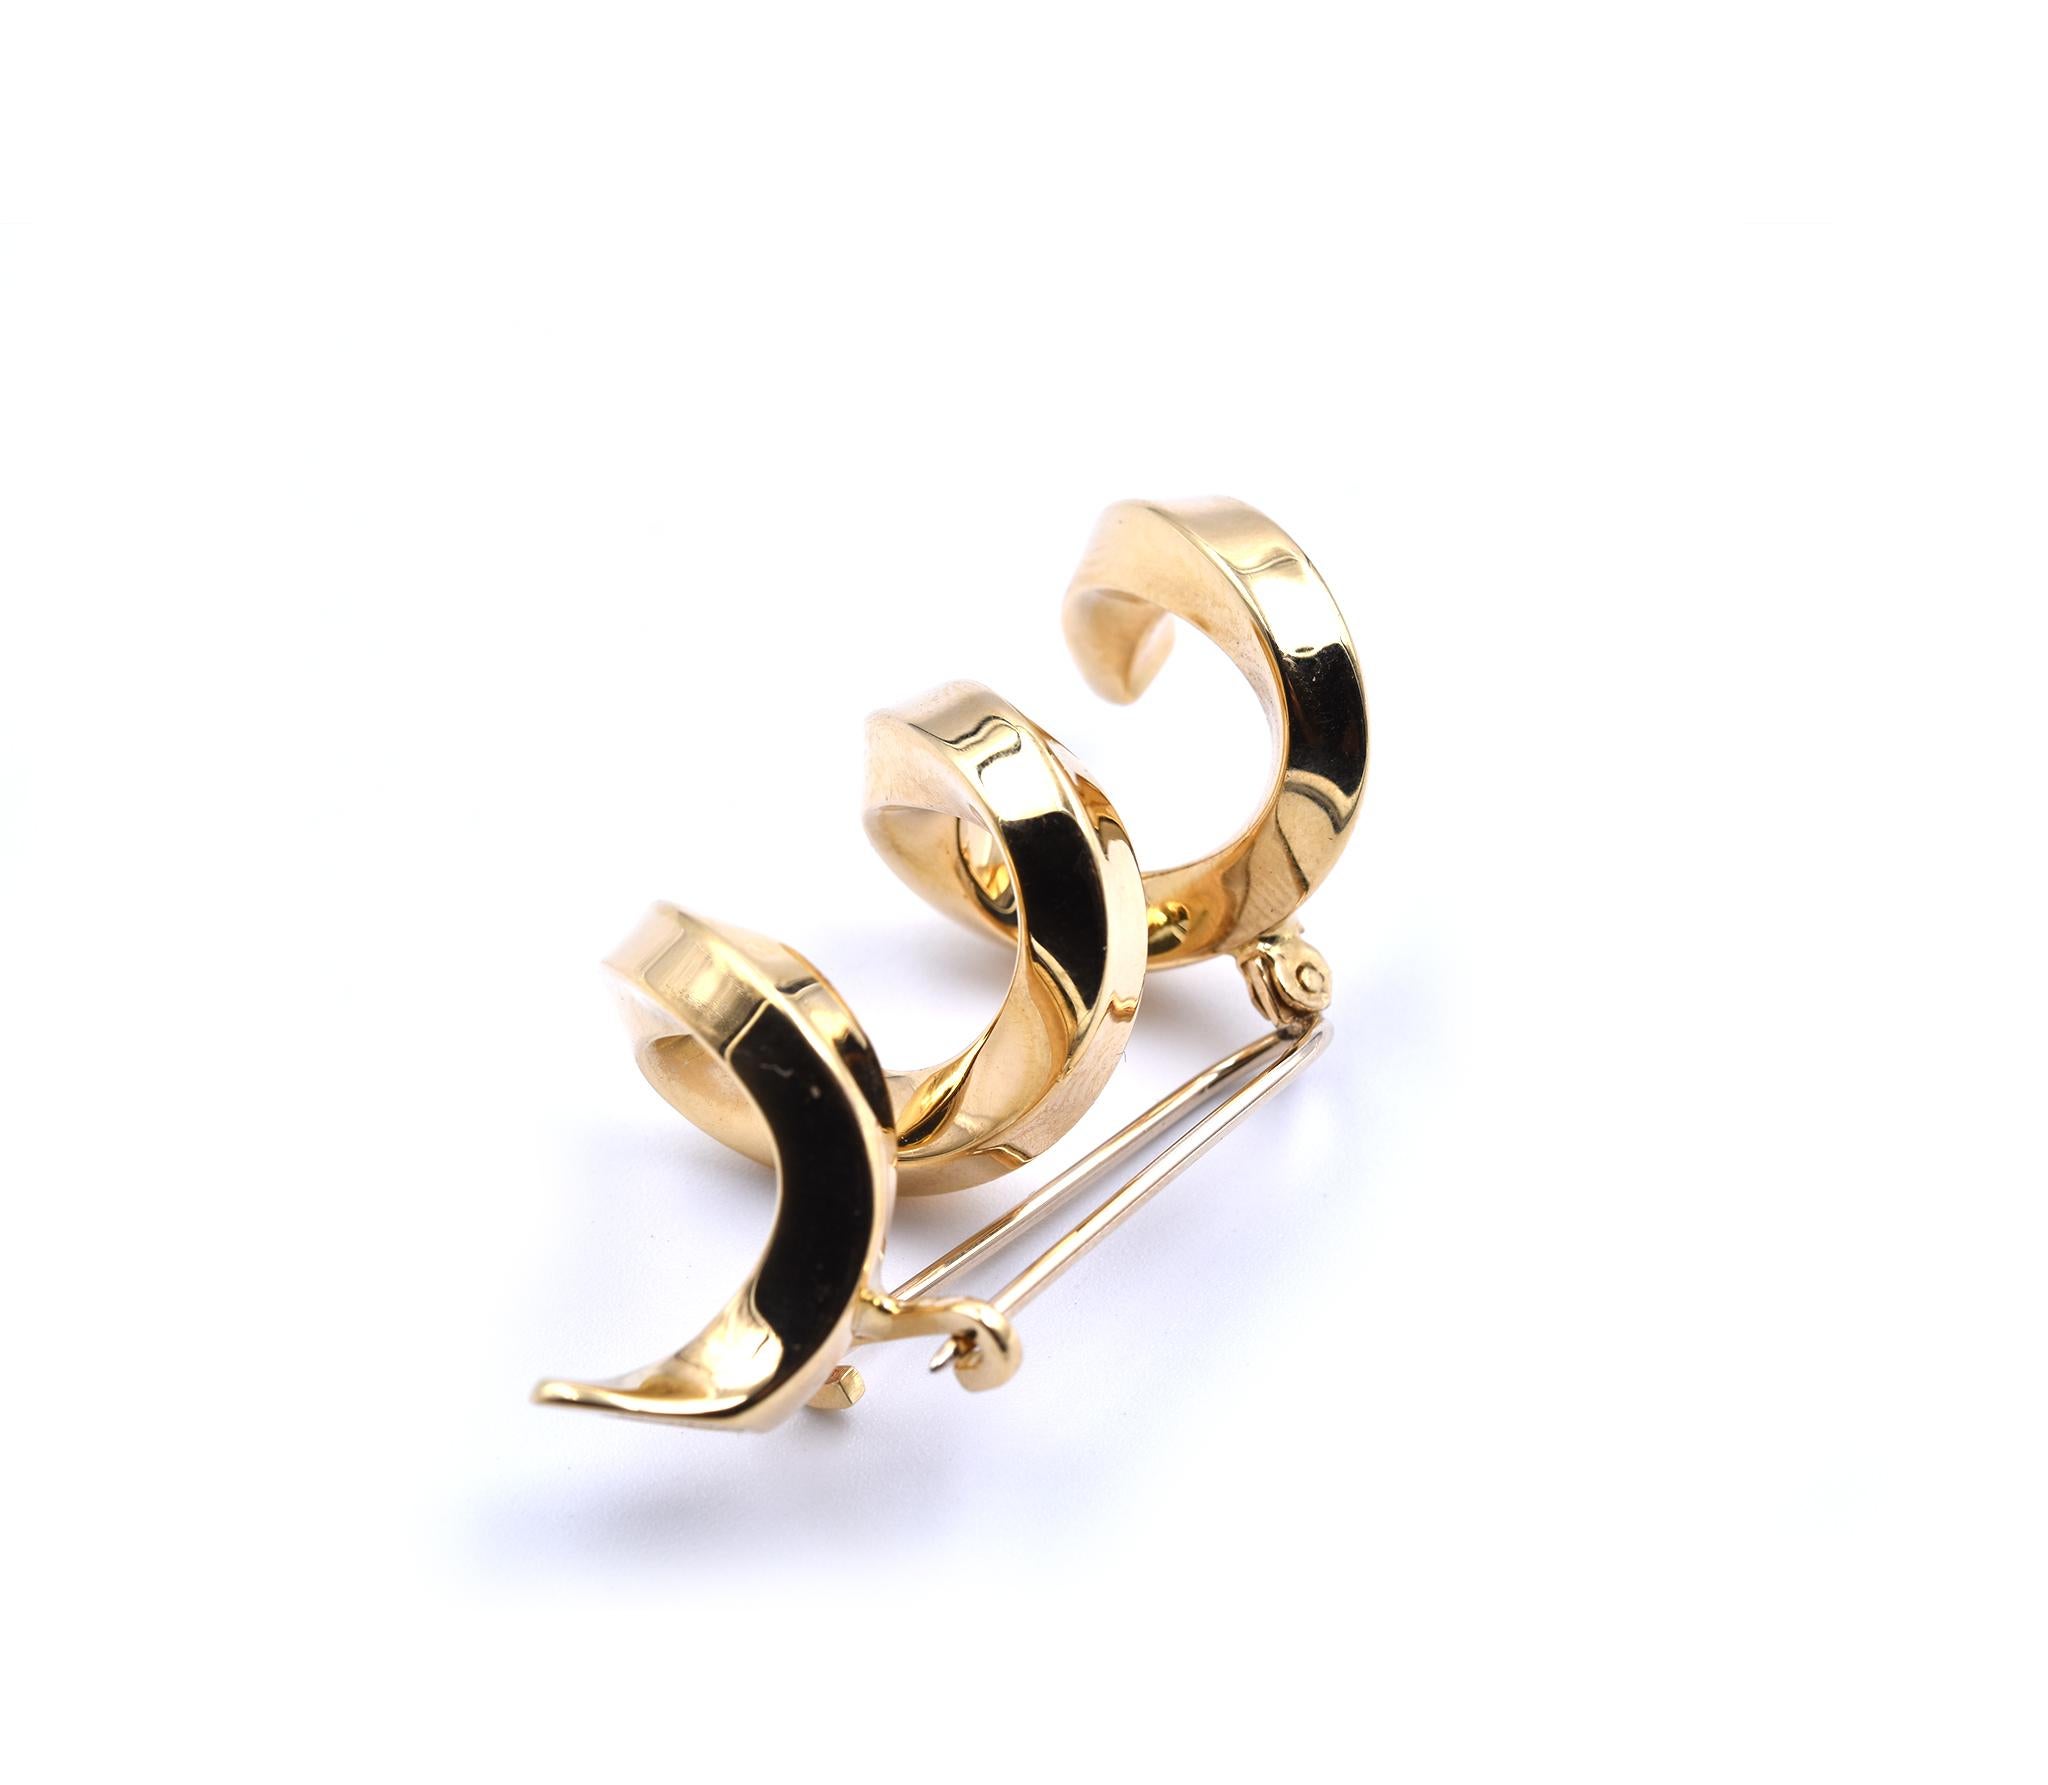 Designer: Tiffany & Co. 
Material: 18k yellow gold
Dimensions: pin is 1 ¾-inch long and 20mm wide
Weight: 13.53 grams
